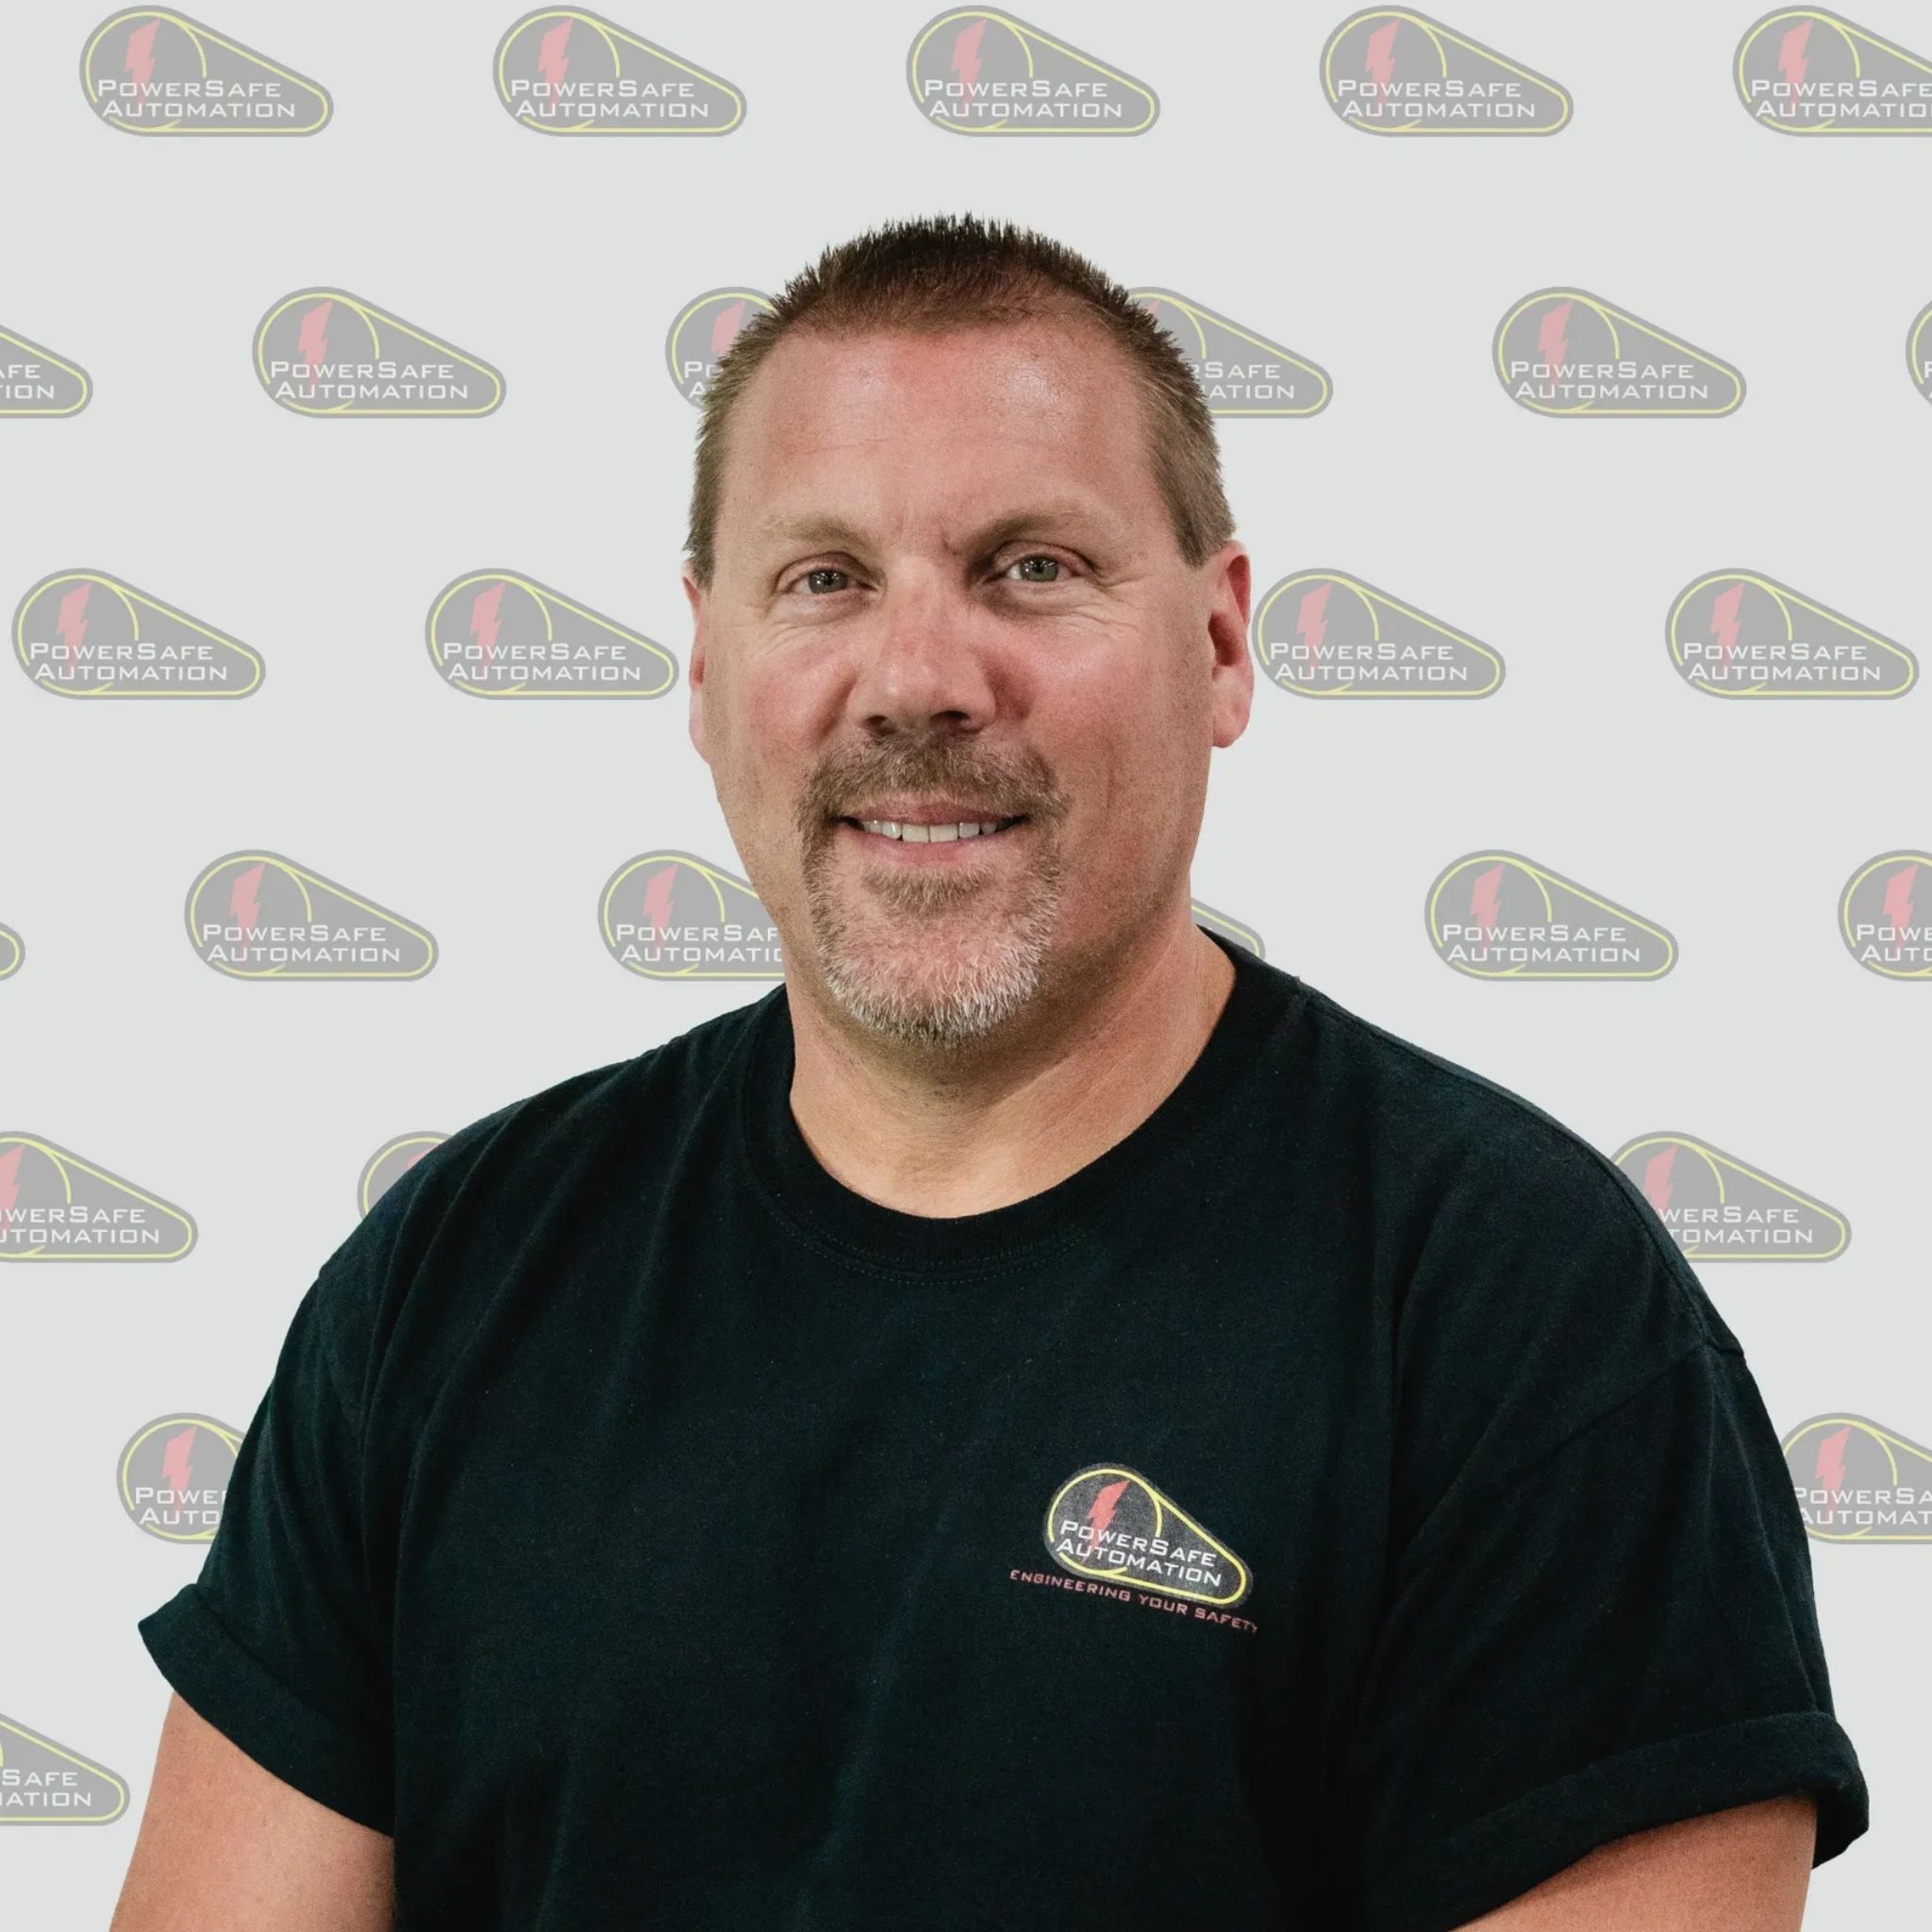 Shawn Mantel, CEO and Sales Engineer at PowerSafe Automation